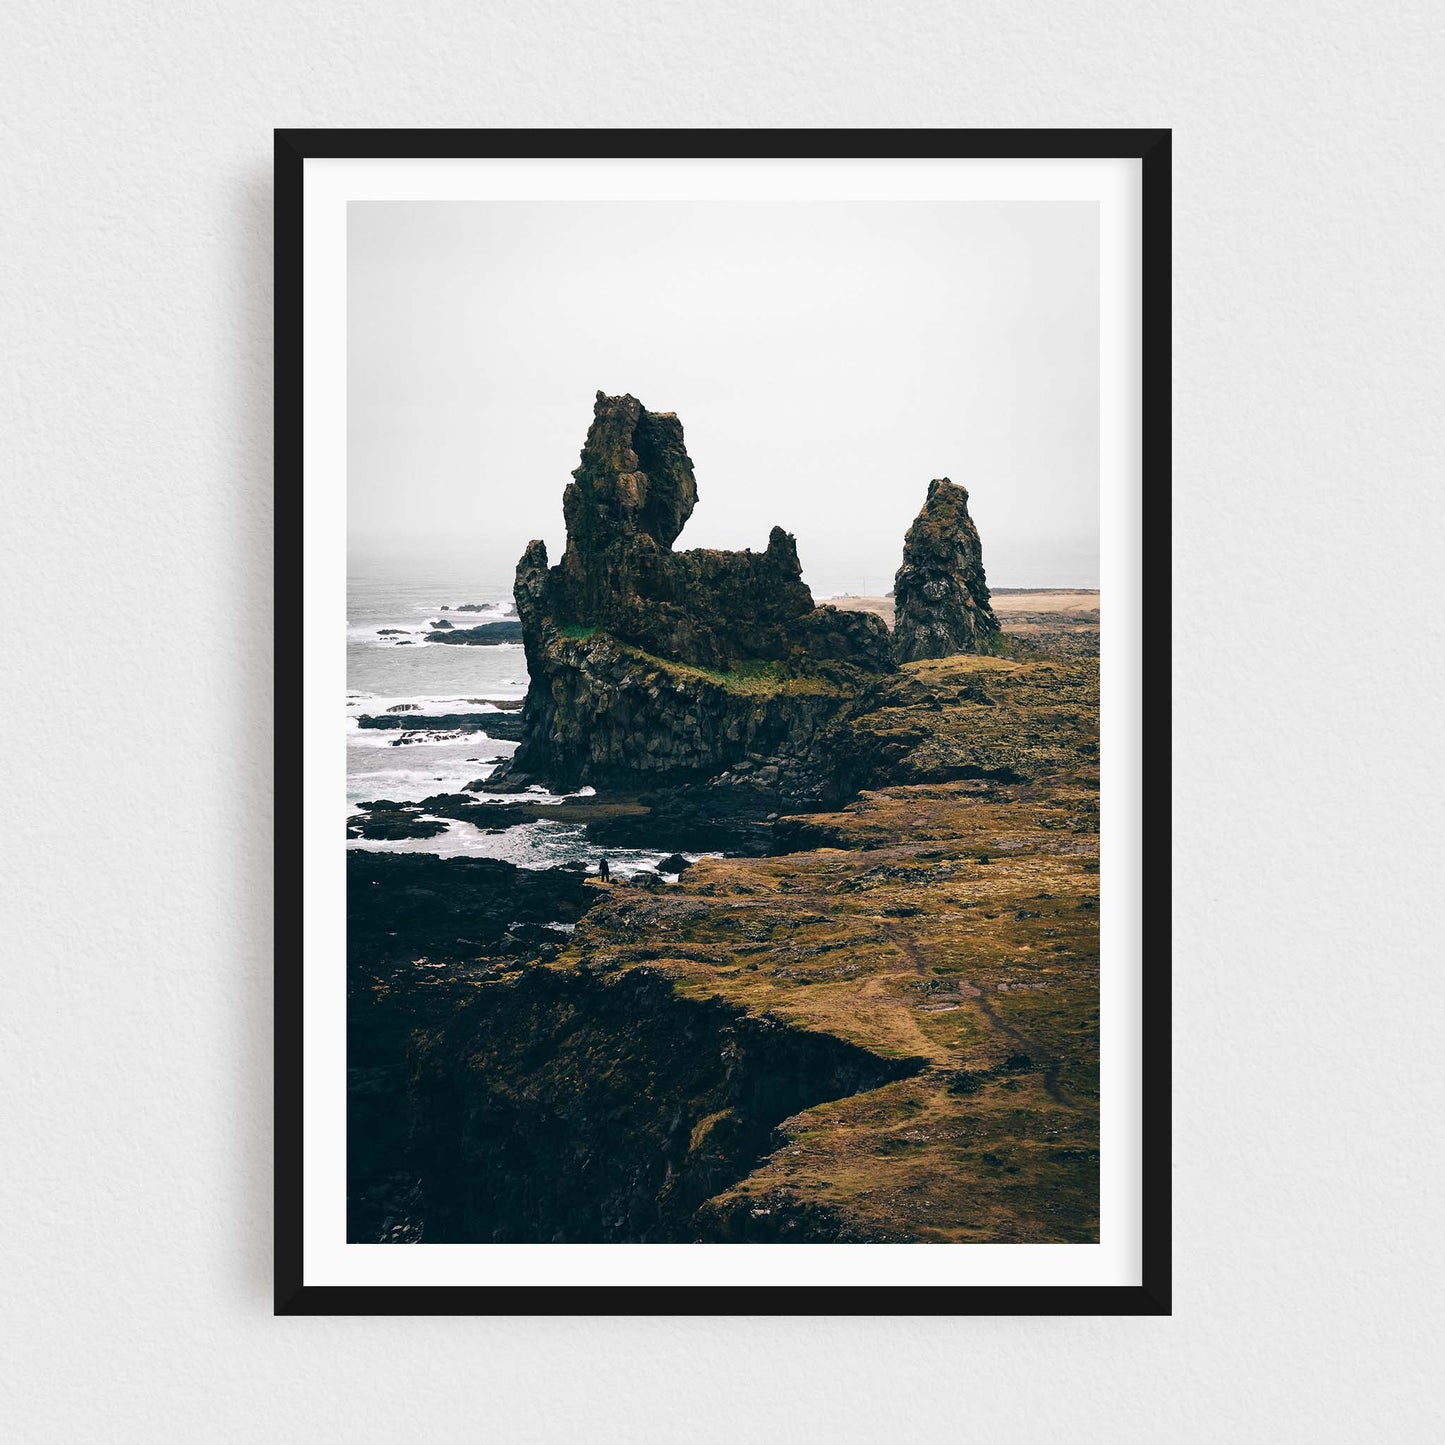 Iceland fine art photography print featuring Londrangar rock formations, in a black frame